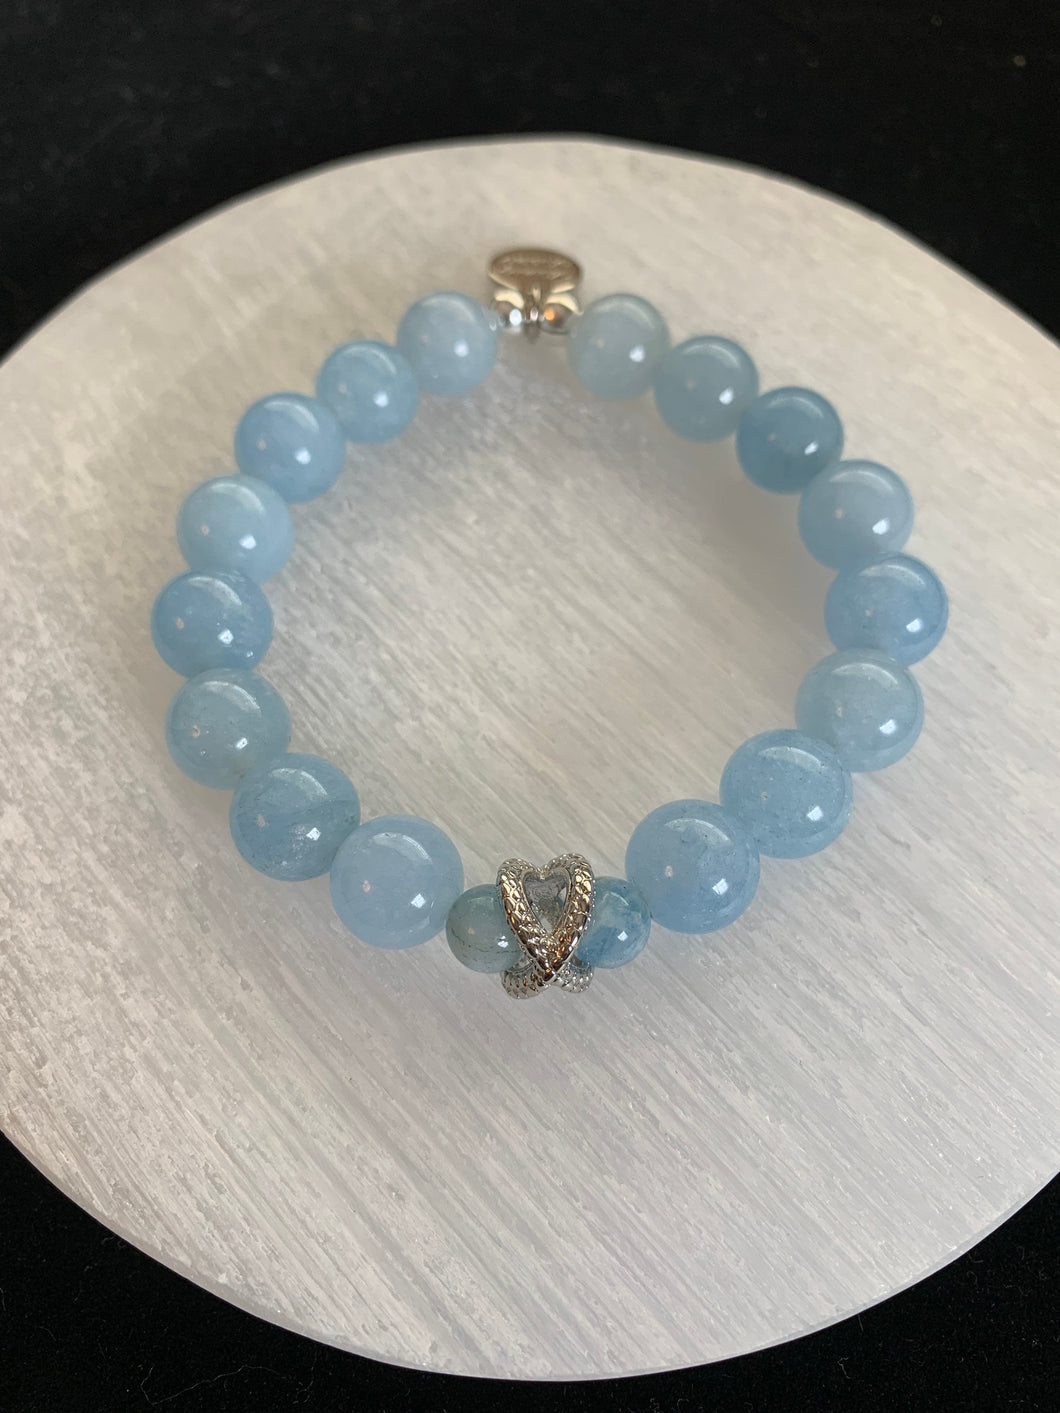 Aquamarine take me away~ beaded bracelet with sterling silver focal bead